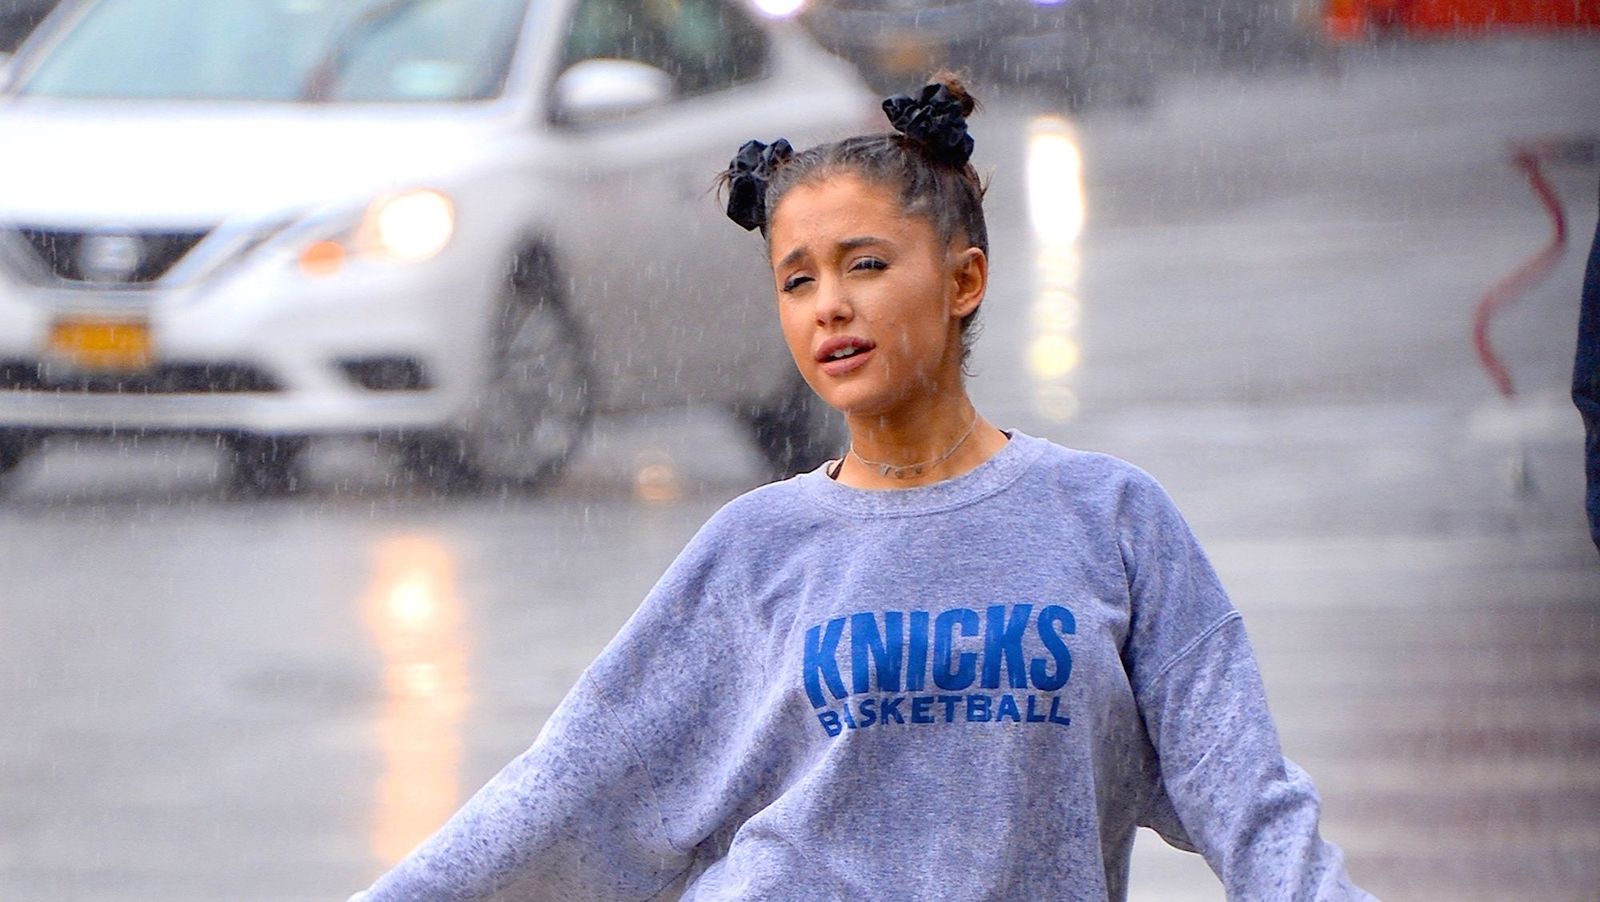 Ariana Grande Appeared In Public For the First Time Since Stepping Back ...